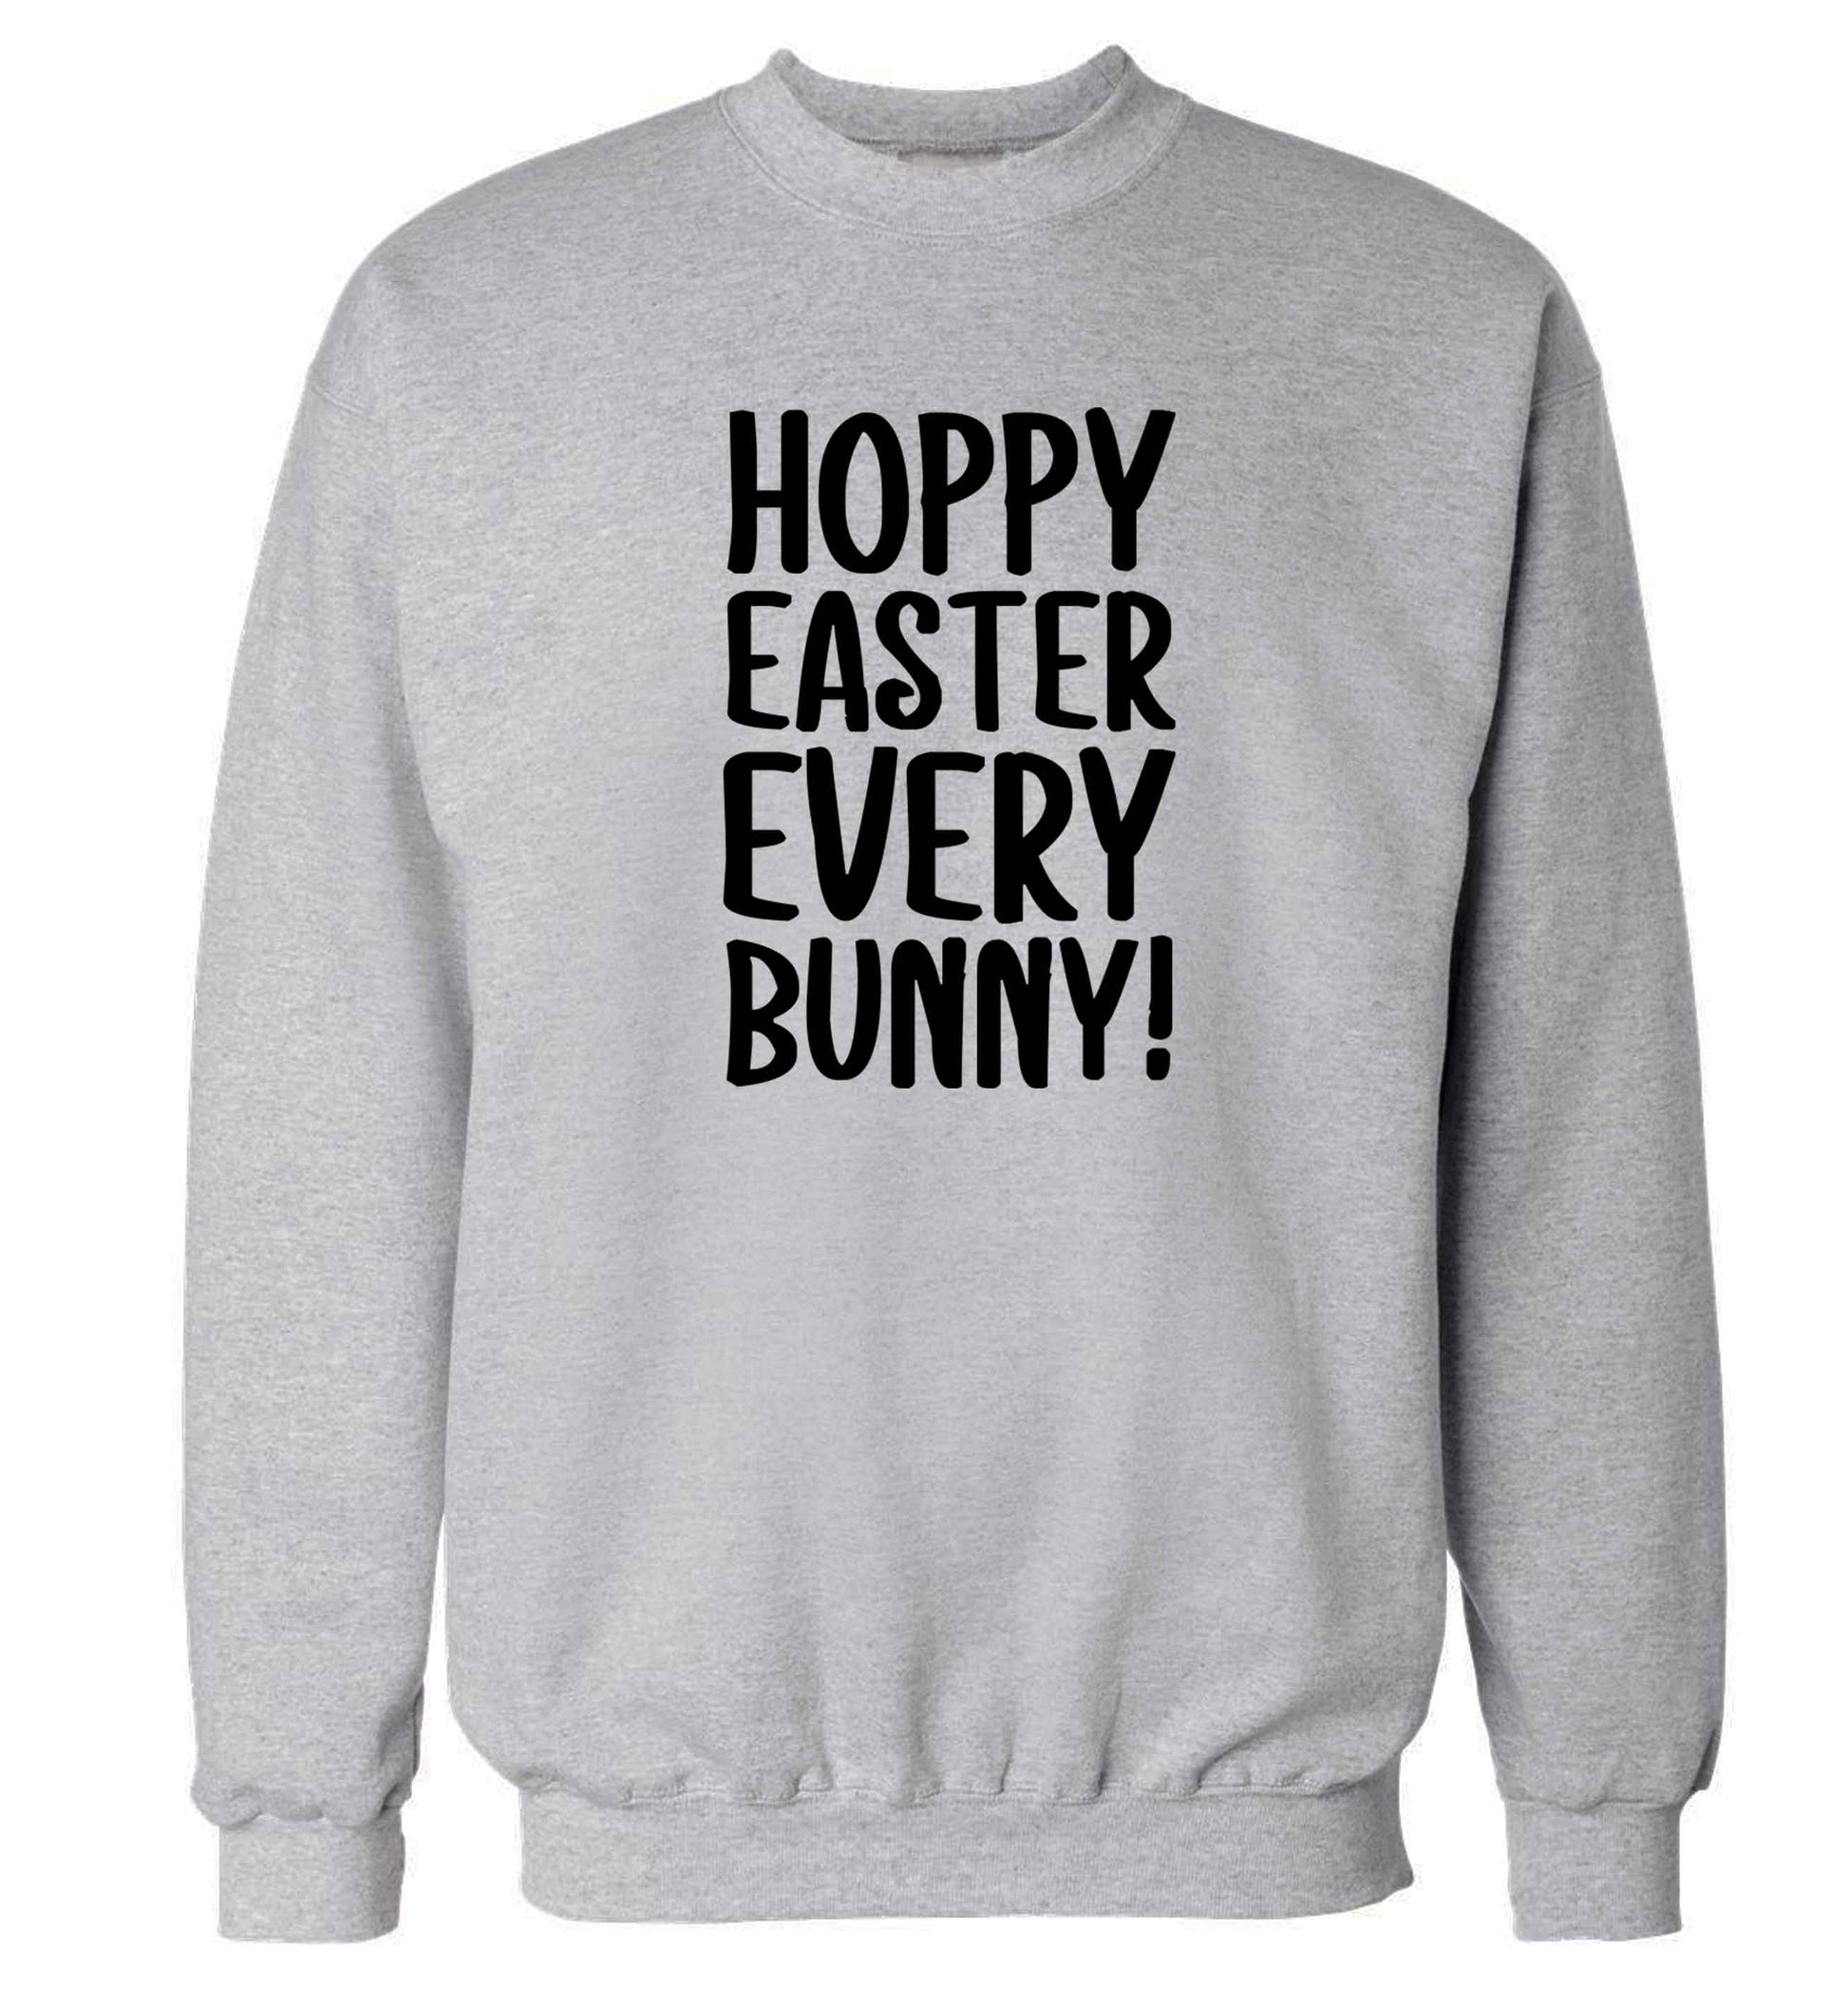 Hoppy Easter every bunny! adult's unisex grey sweater 2XL